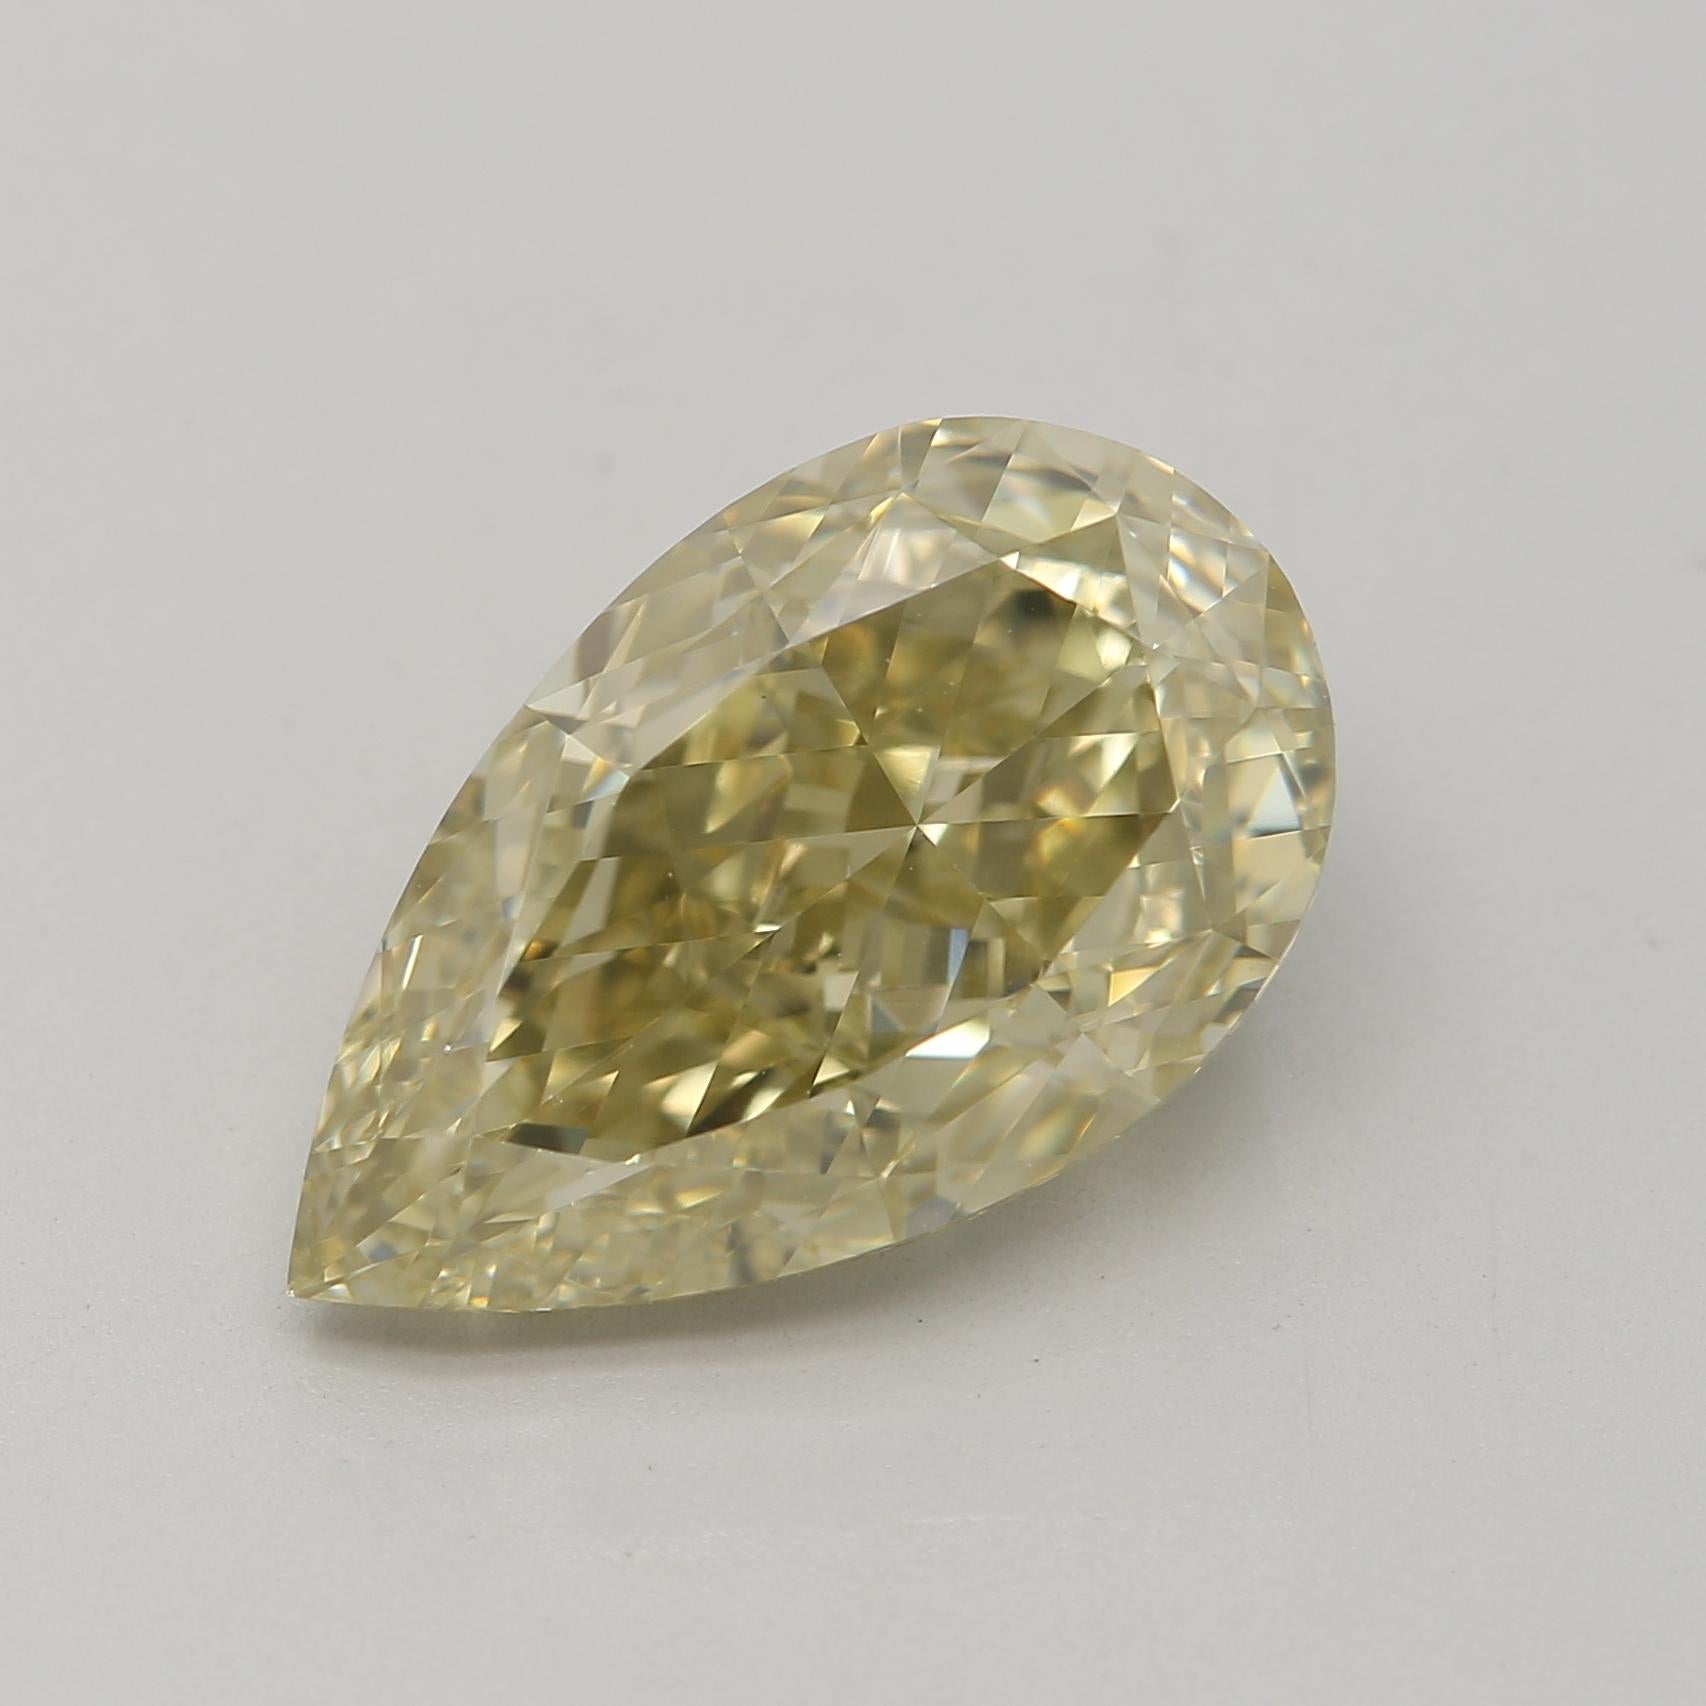 *100% NATURAL FANCY COLOUR DIAMOND*

✪ Diamond Details ✪

➛ Shape: Pear
➛ Colour Grade: Fancy Brownish Greenish Yellow
➛ Carat: 3.50
➛ Clarity: VS2
➛ GIA Certified 

^FEATURES OF THE DIAMOND^

Our pear-cut diamond is characterized by its unique